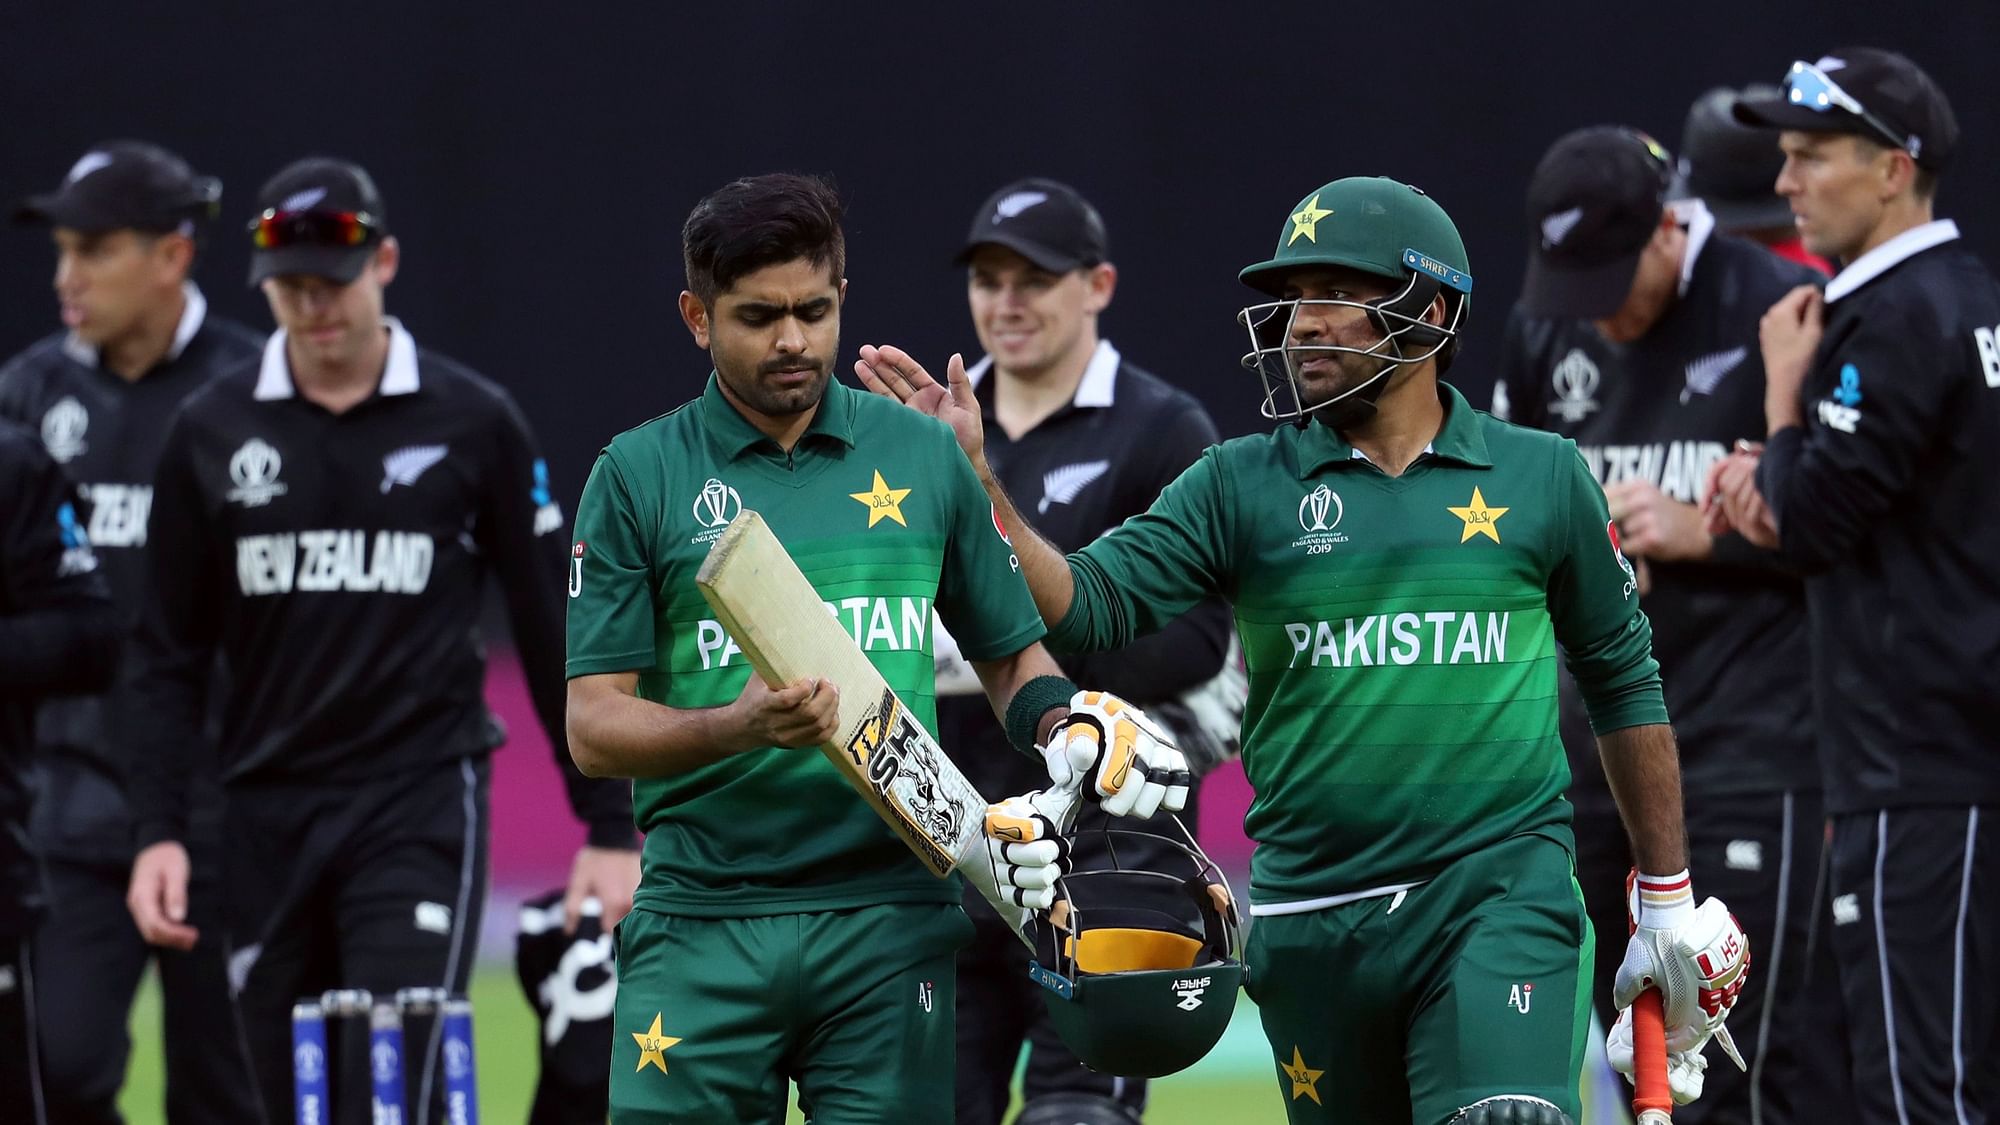 Pakistan’s captain Sarfaraz Ahmed, right, pats on the shoulder teammate Babar Azam for scoring a century at the end of the Cricket World Cup match between New Zealand and Pakistan.